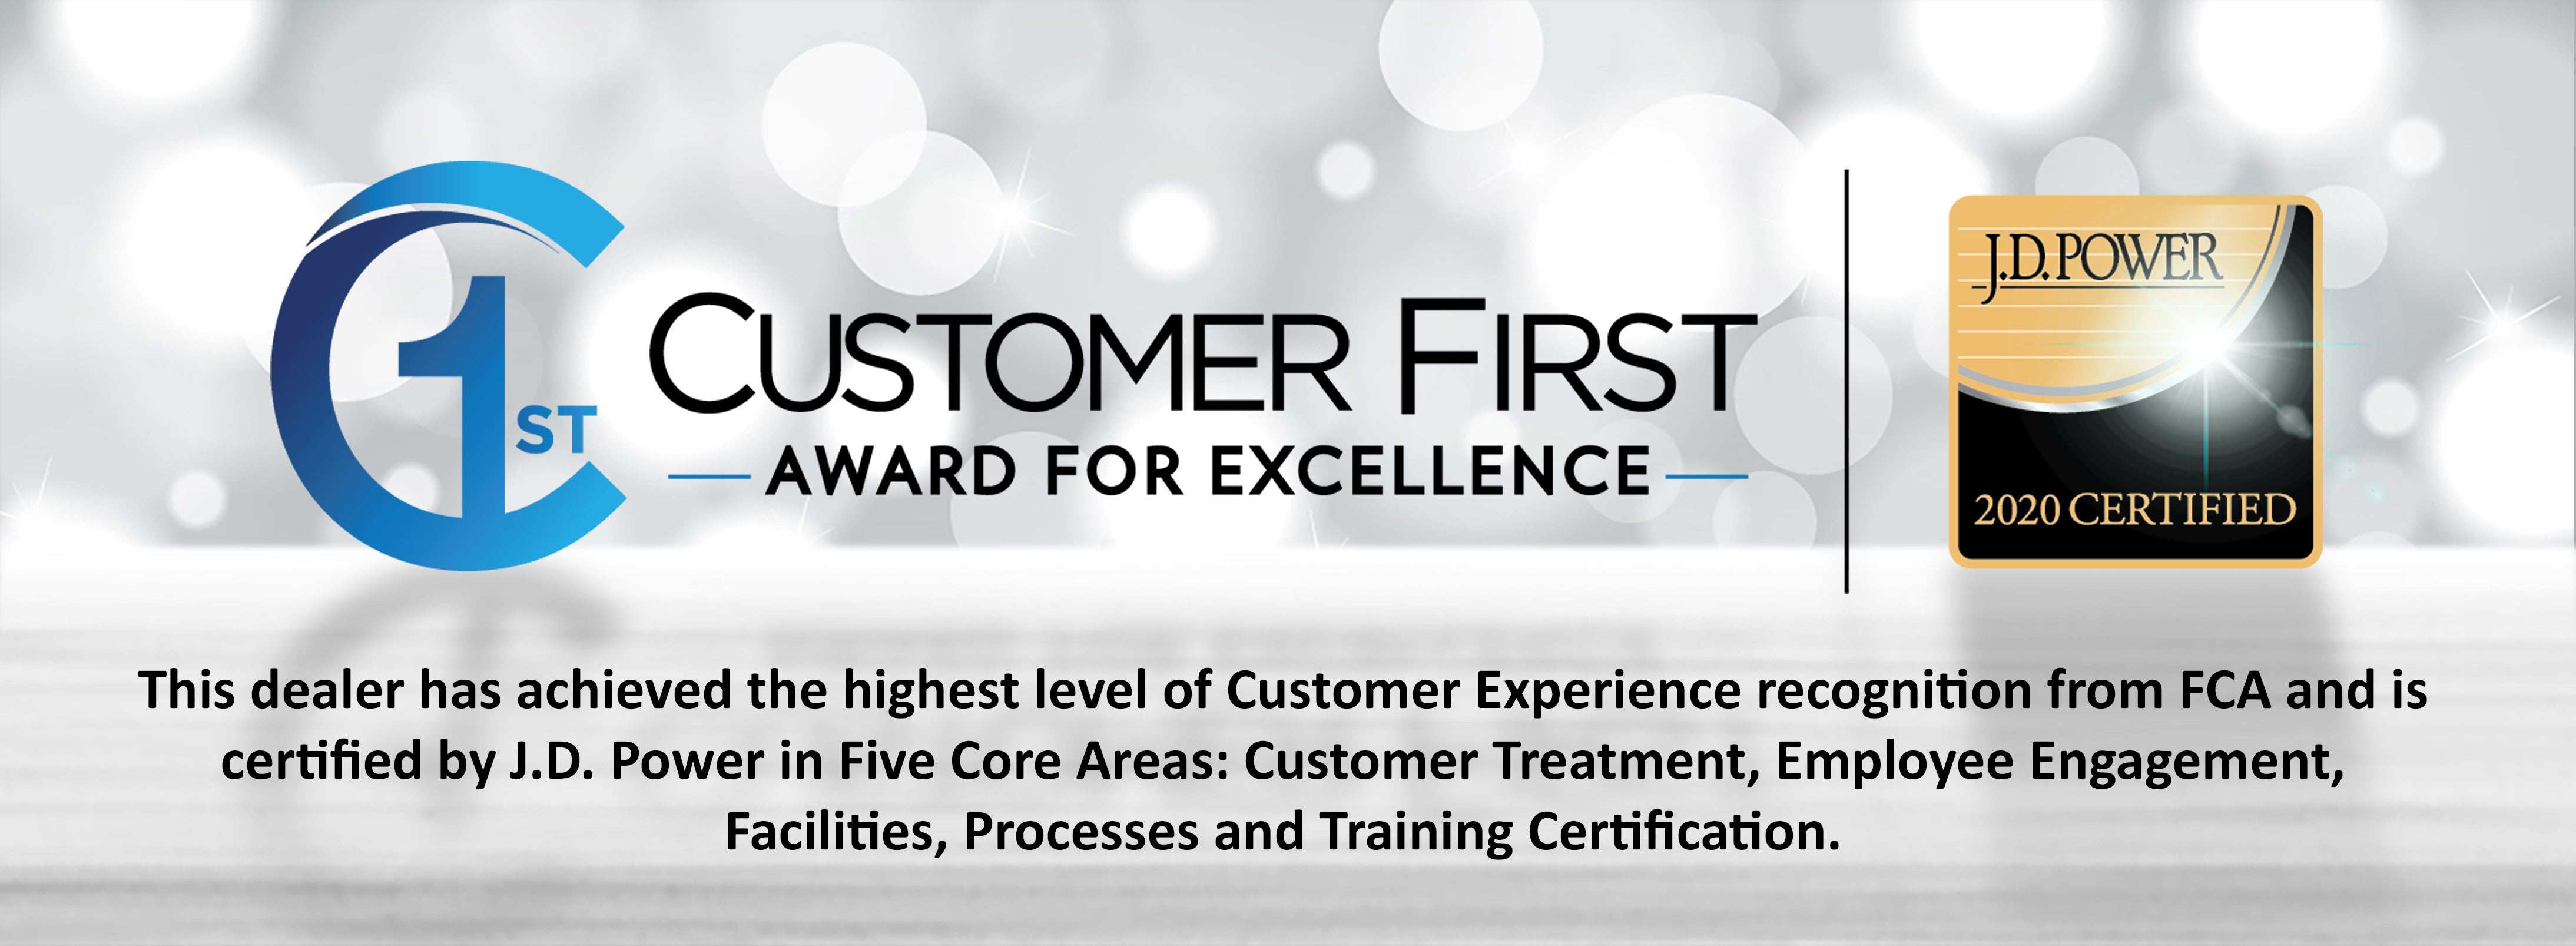 Customer First Award for Excellence for 2019 at Owatonna Chrysler Center in Owatonna, MN